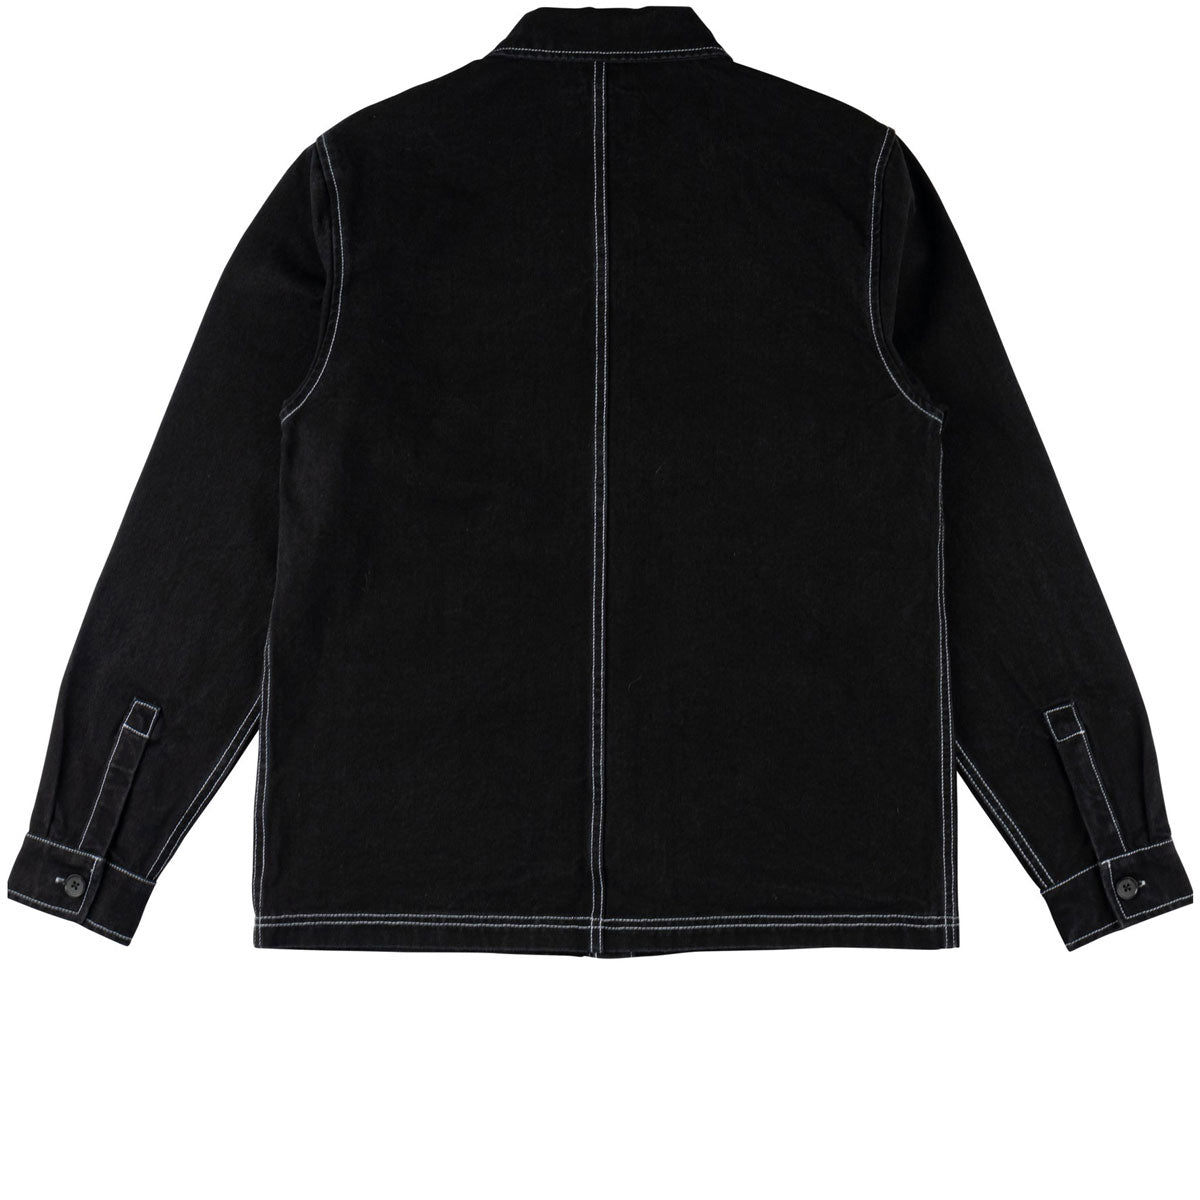 Welcome Stowaway Canvas Chore Jacket - Black image 5